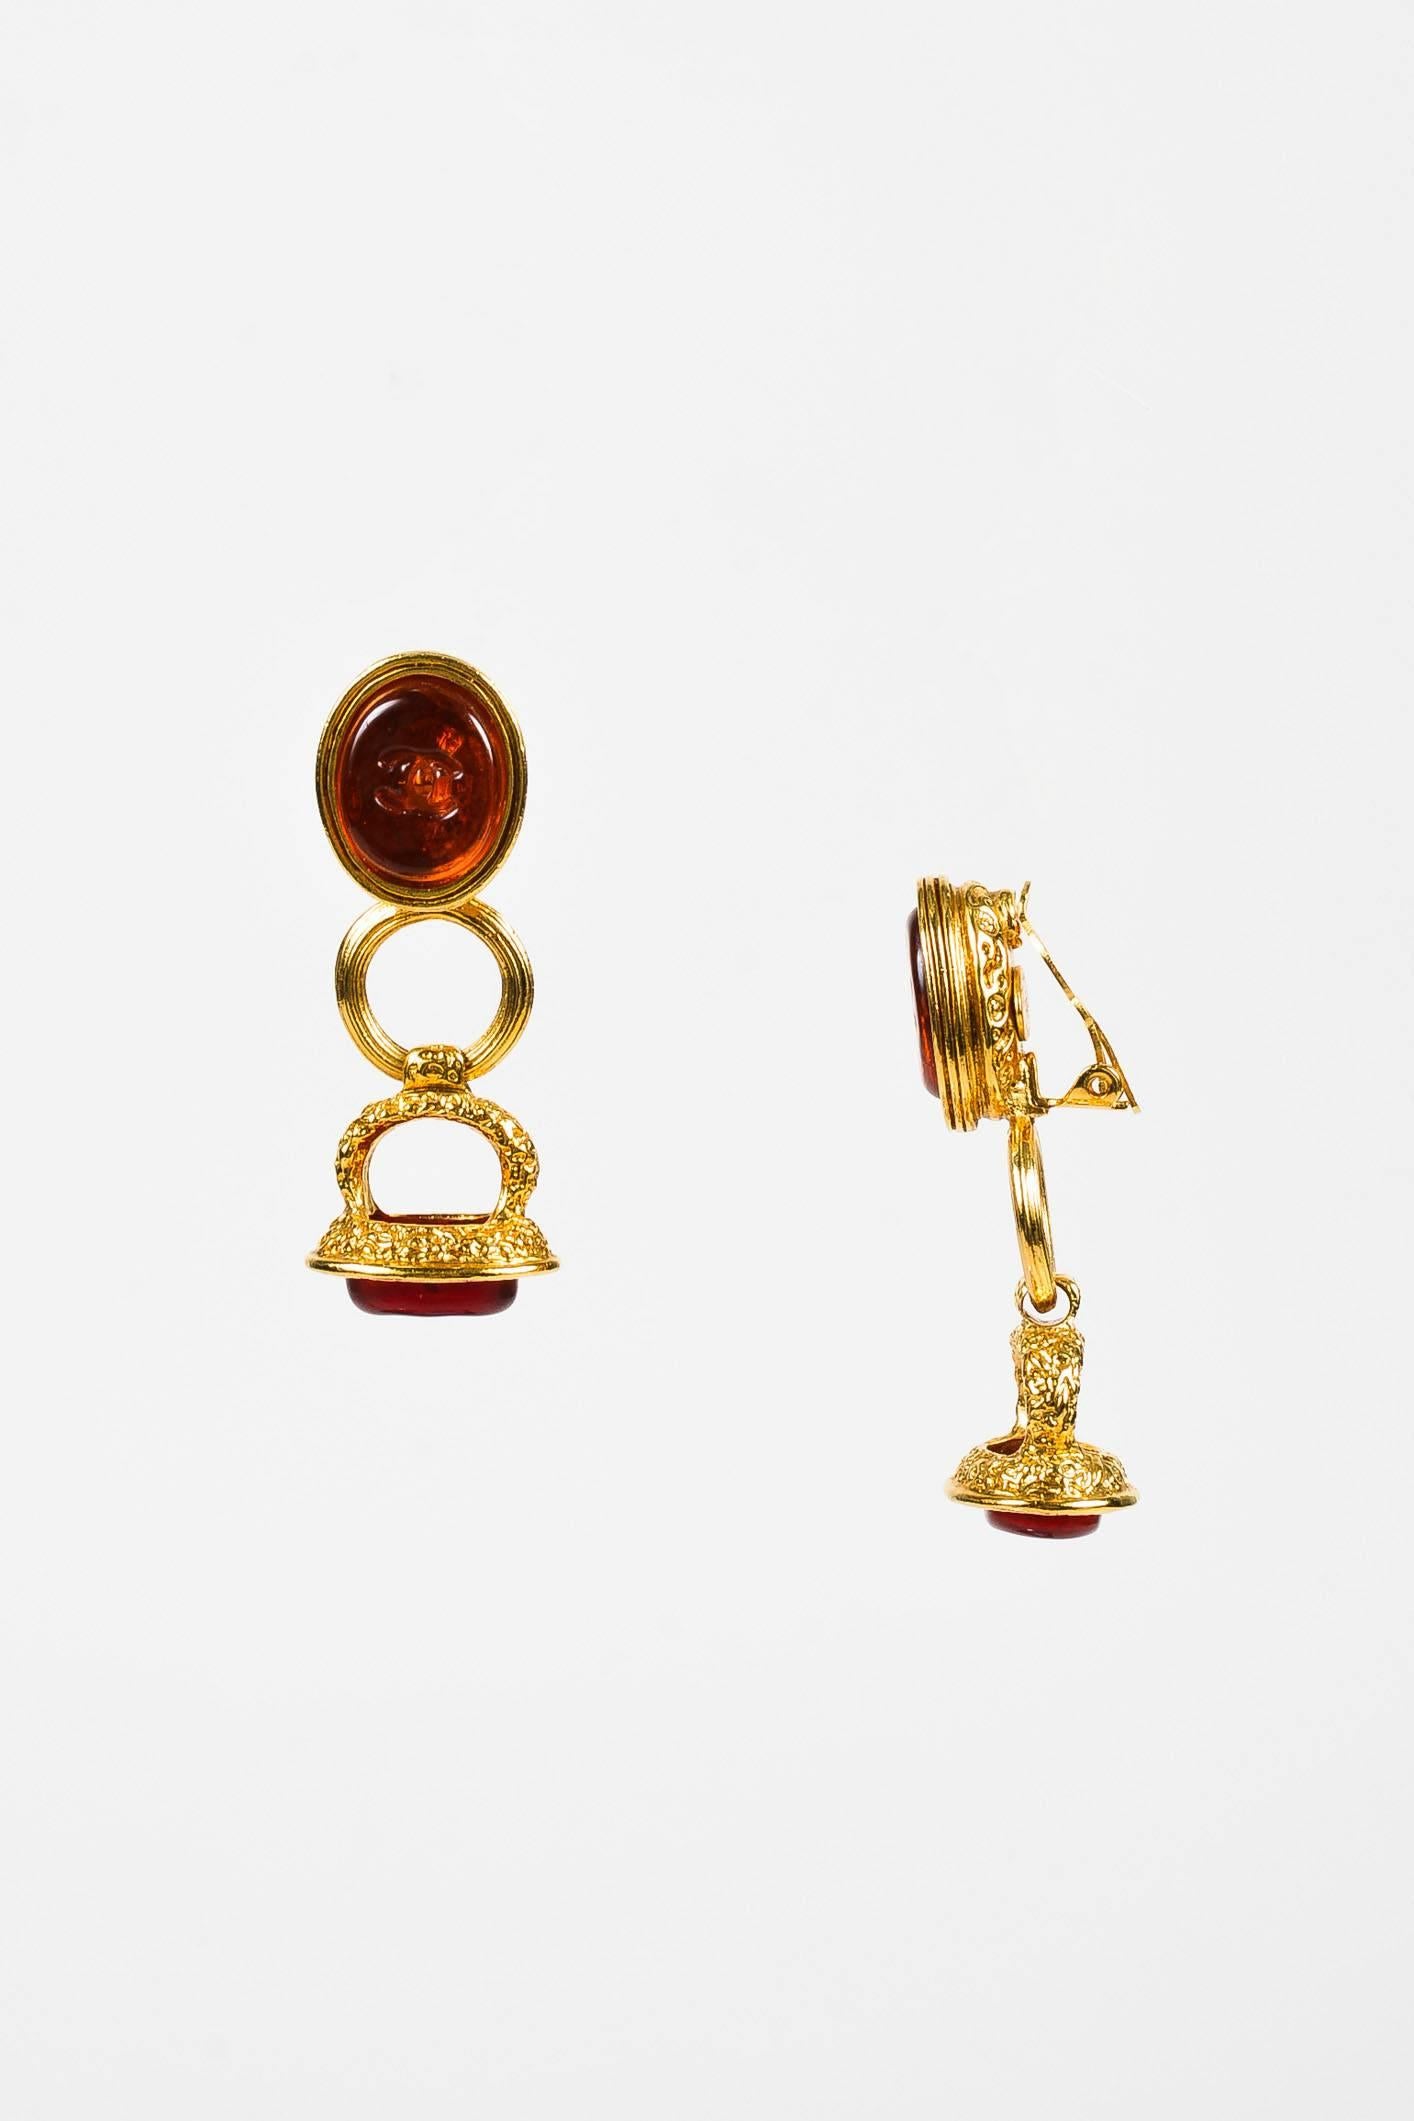 Made In: France
Fabric Content: Gold-Tone Metal, Gripoix

Item Specifics & Details: Gold-tone dangle clip on earrings from Chanel circa Fall 1993 Collection. Red gripoix embellishments feature embossed 'CC' logos.

Measurements:
Total